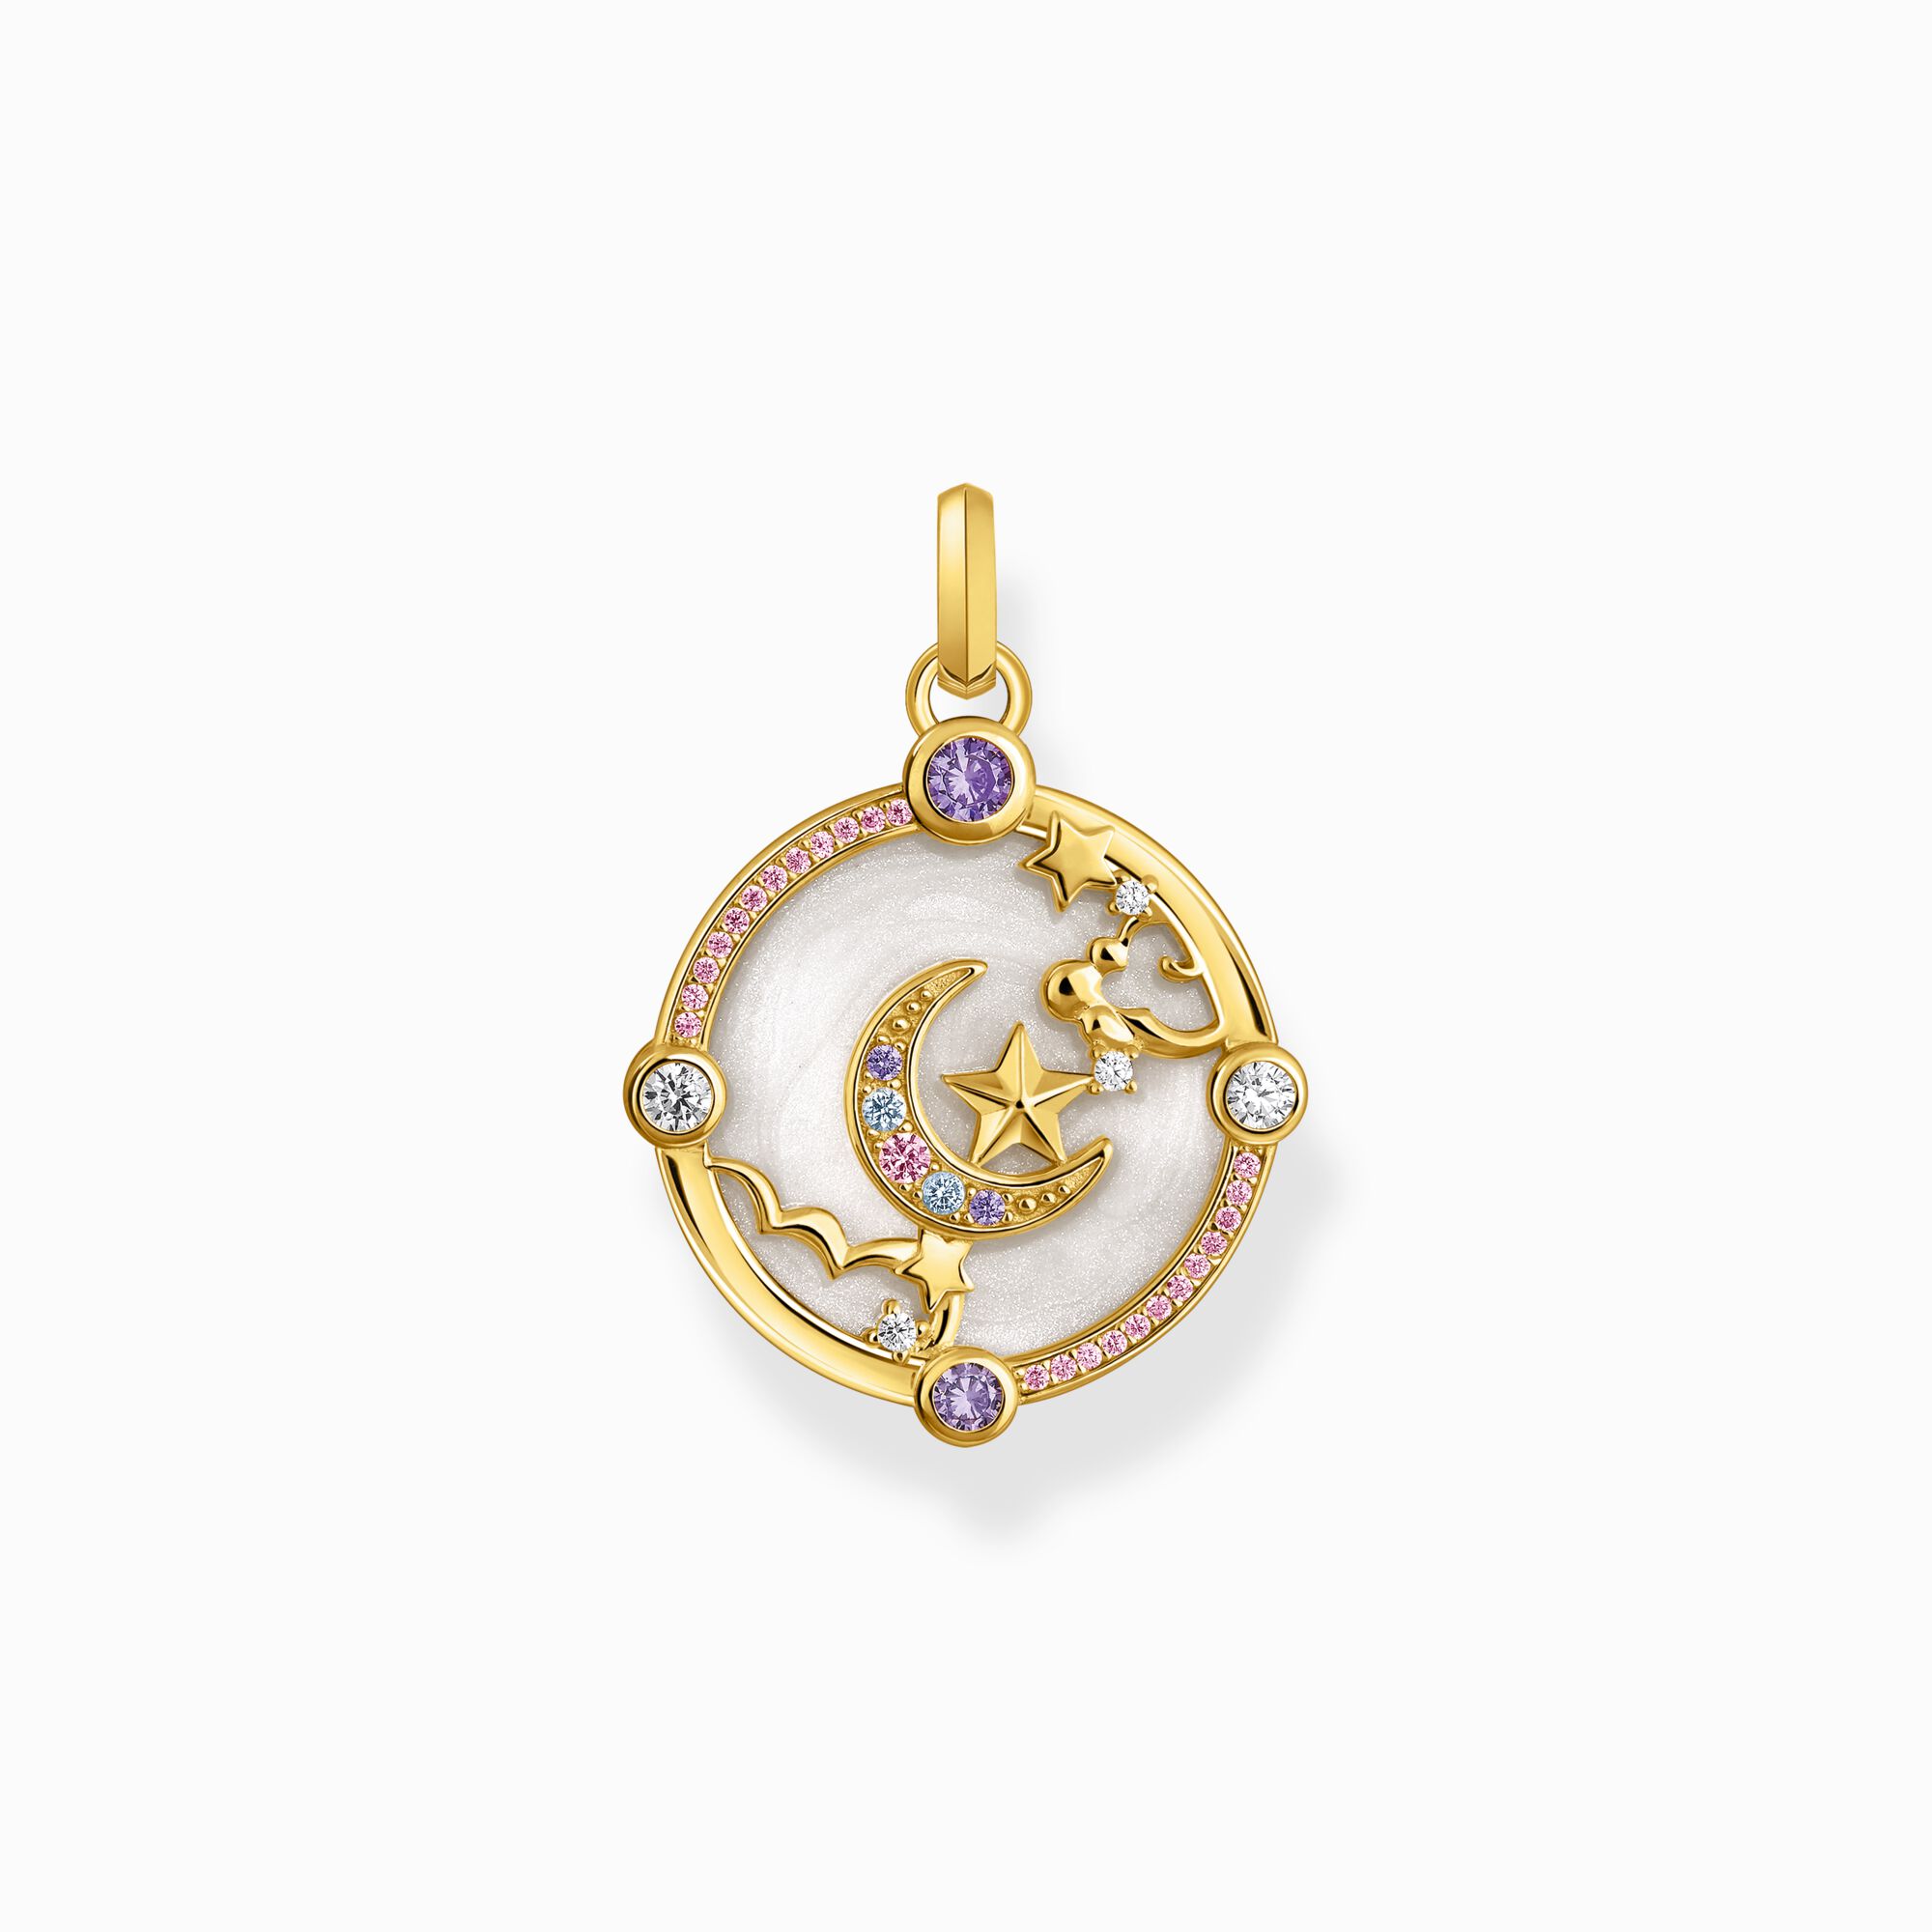 Thomas Sabo + Yellow-Gold Plated Crescent Moon and Stones Pendant